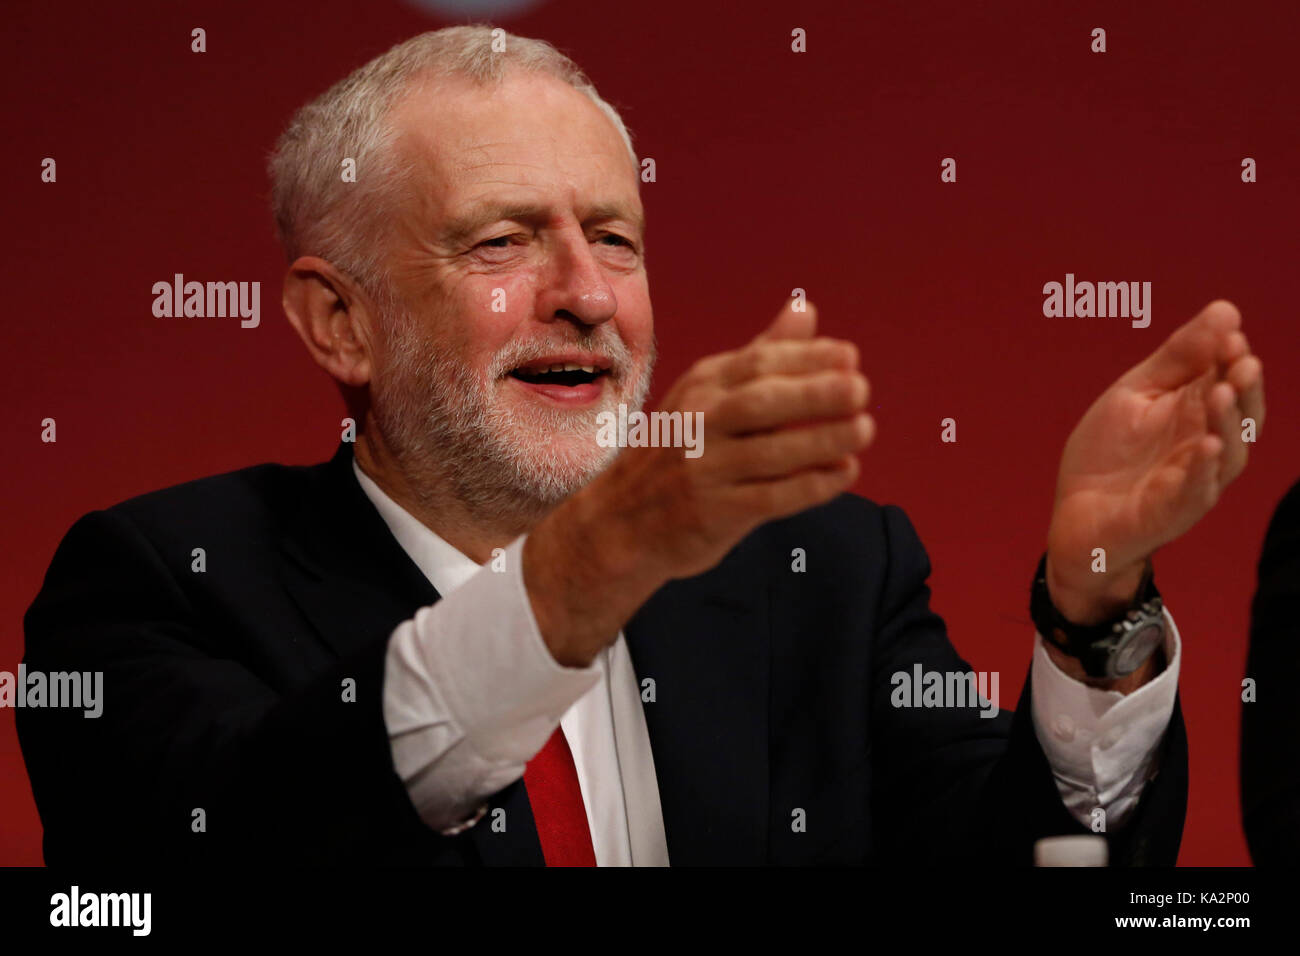 Brighton, UK. 24th September, 2017. Jeremy Corbyn, leader of Britain's opposition Labour party gestures during the annual Labour Party Conference in Brighton, UK Sunday, September 24, 2017. Photograph : Credit: Luke MacGregor/Alamy Live News Stock Photo